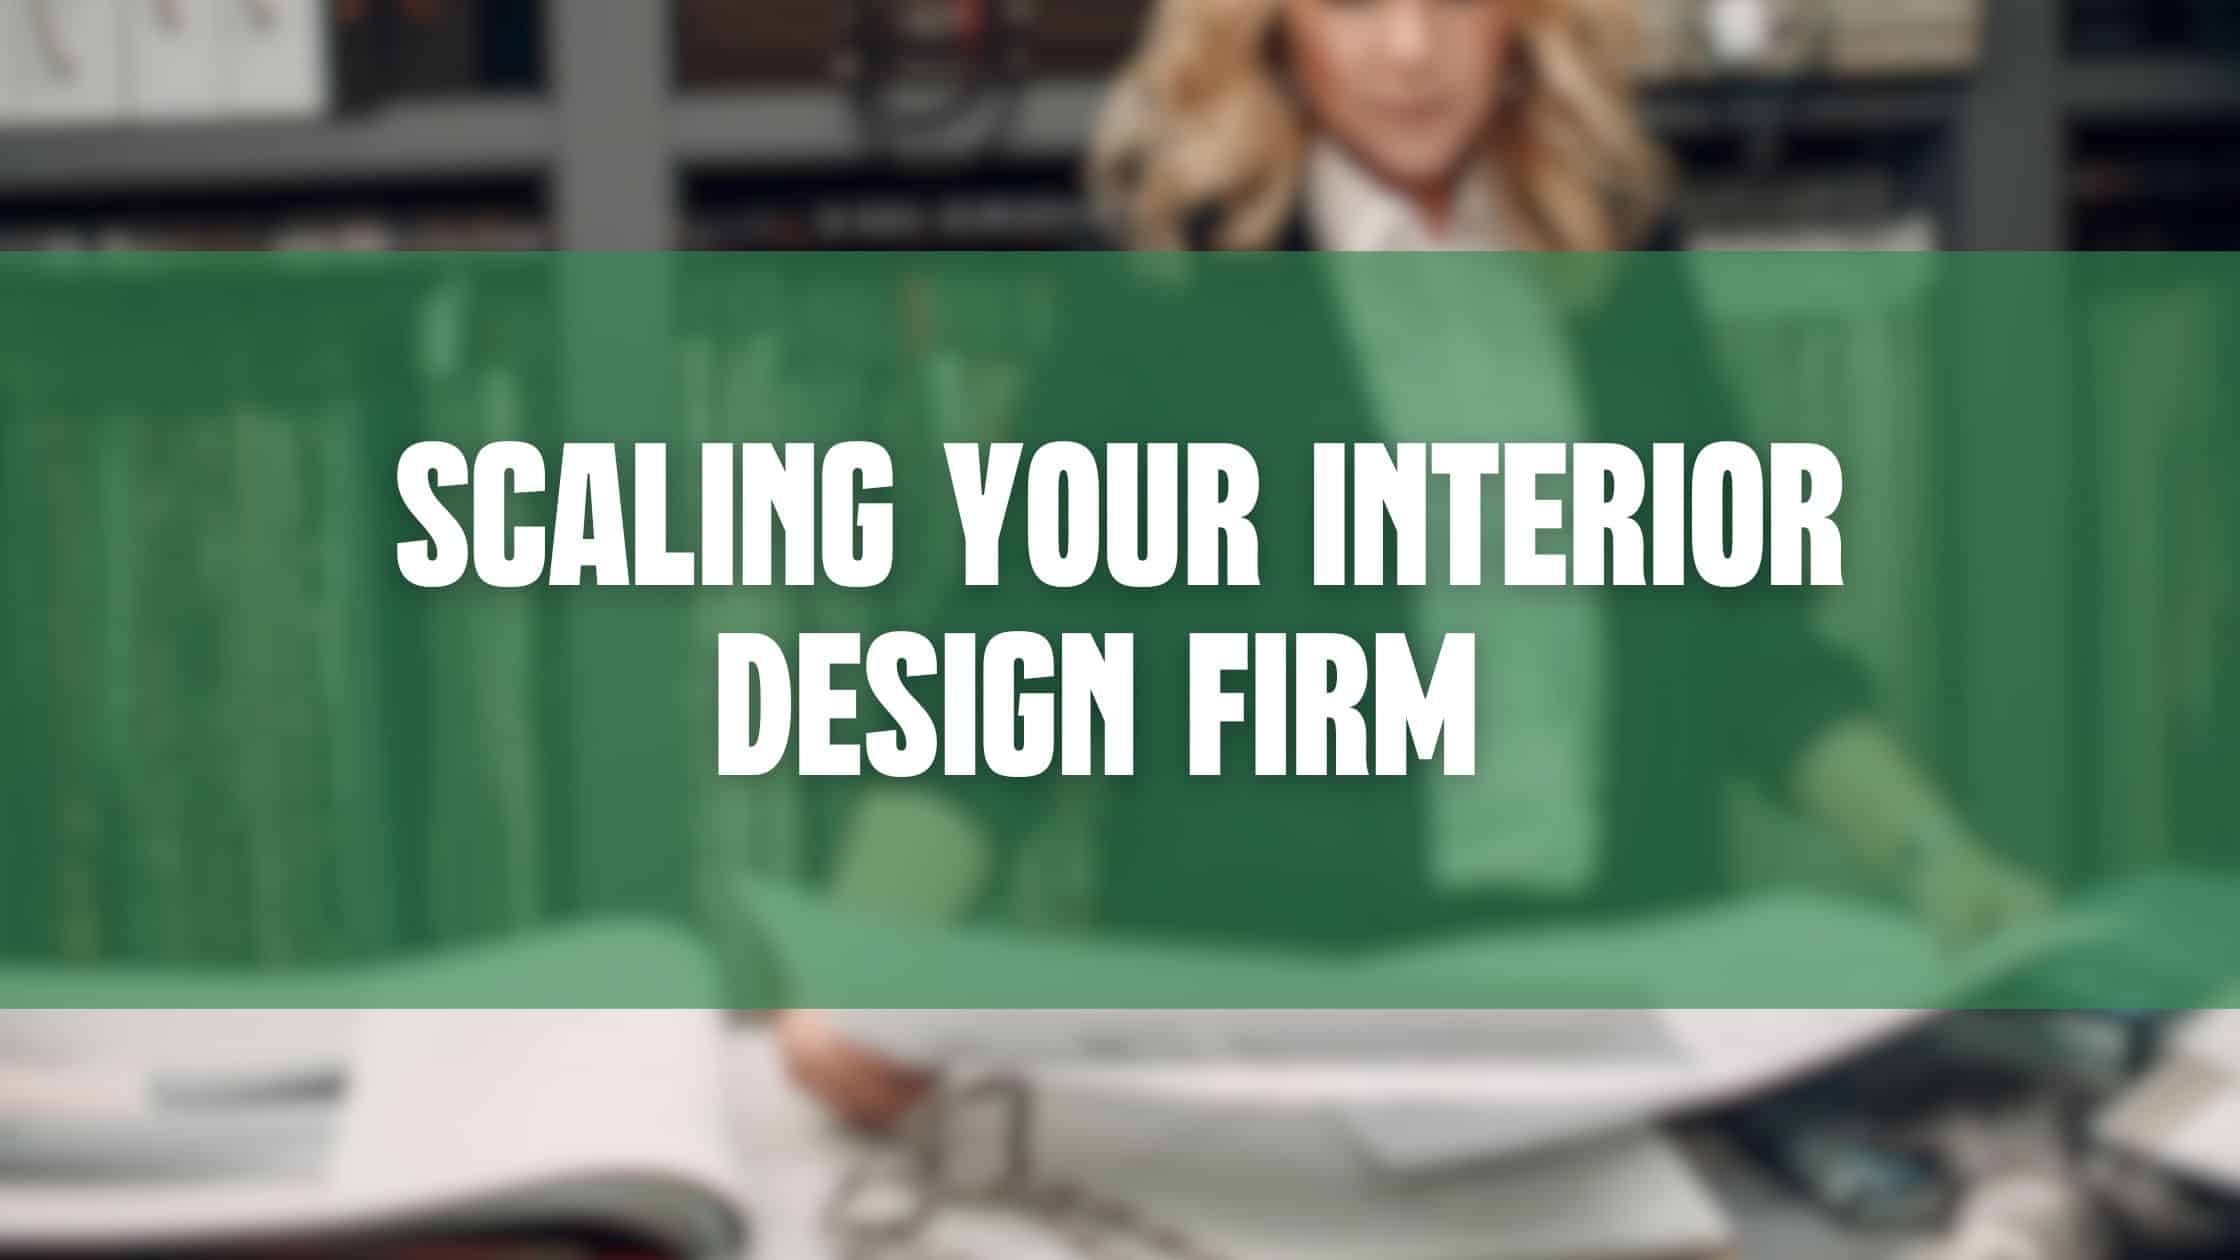 SCALING YOUR INTERIOR DESIGN FIRM with an interior design firm with an interior design business coachblog header image